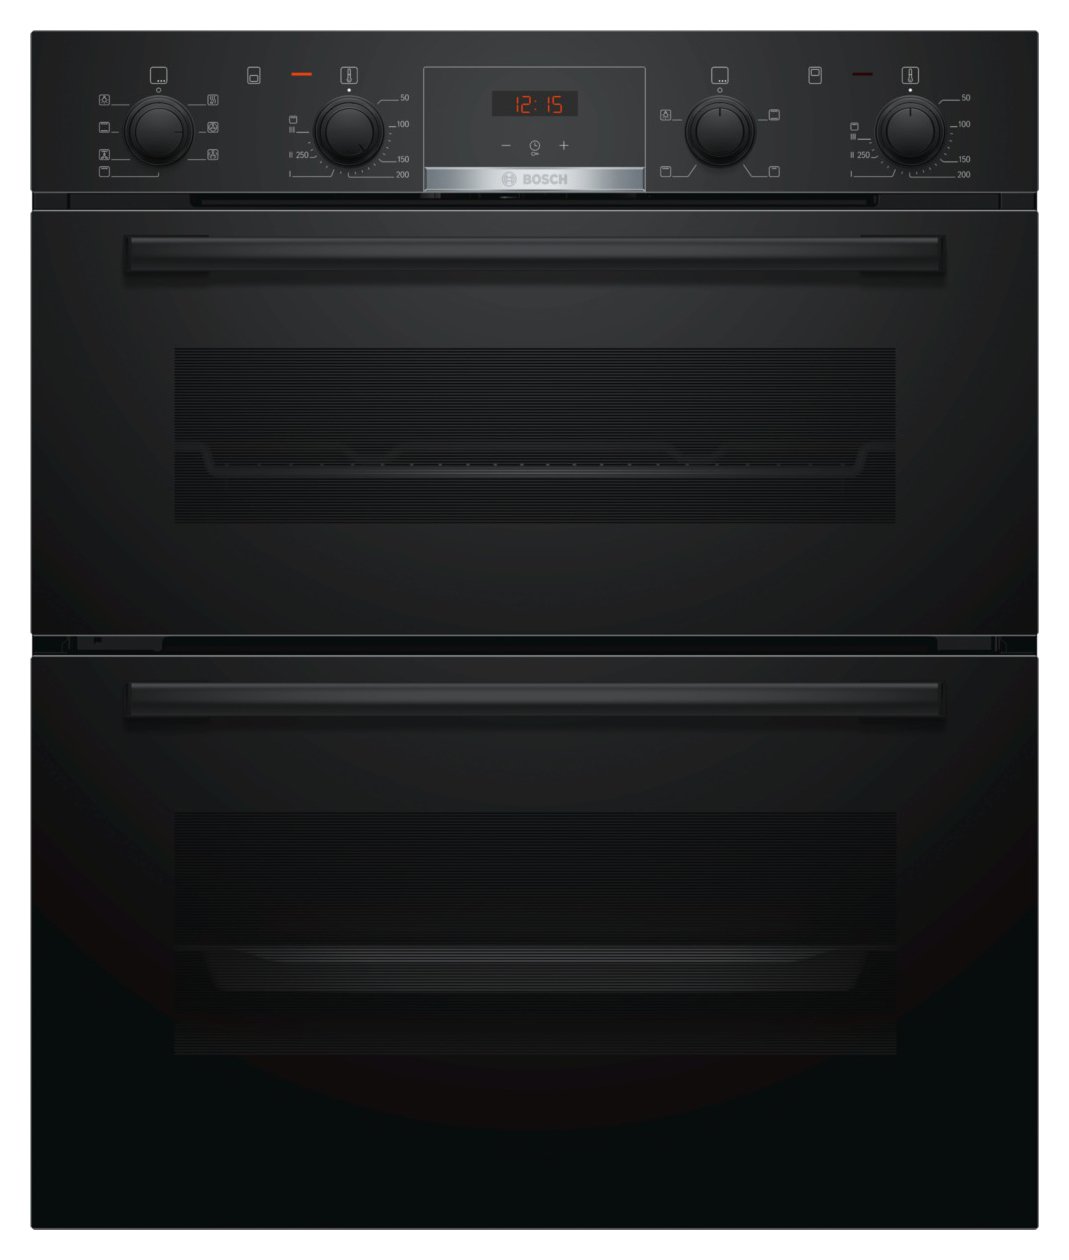 Bosch NBS533BB0B 59.4cm Double Oven Electric Cooker review